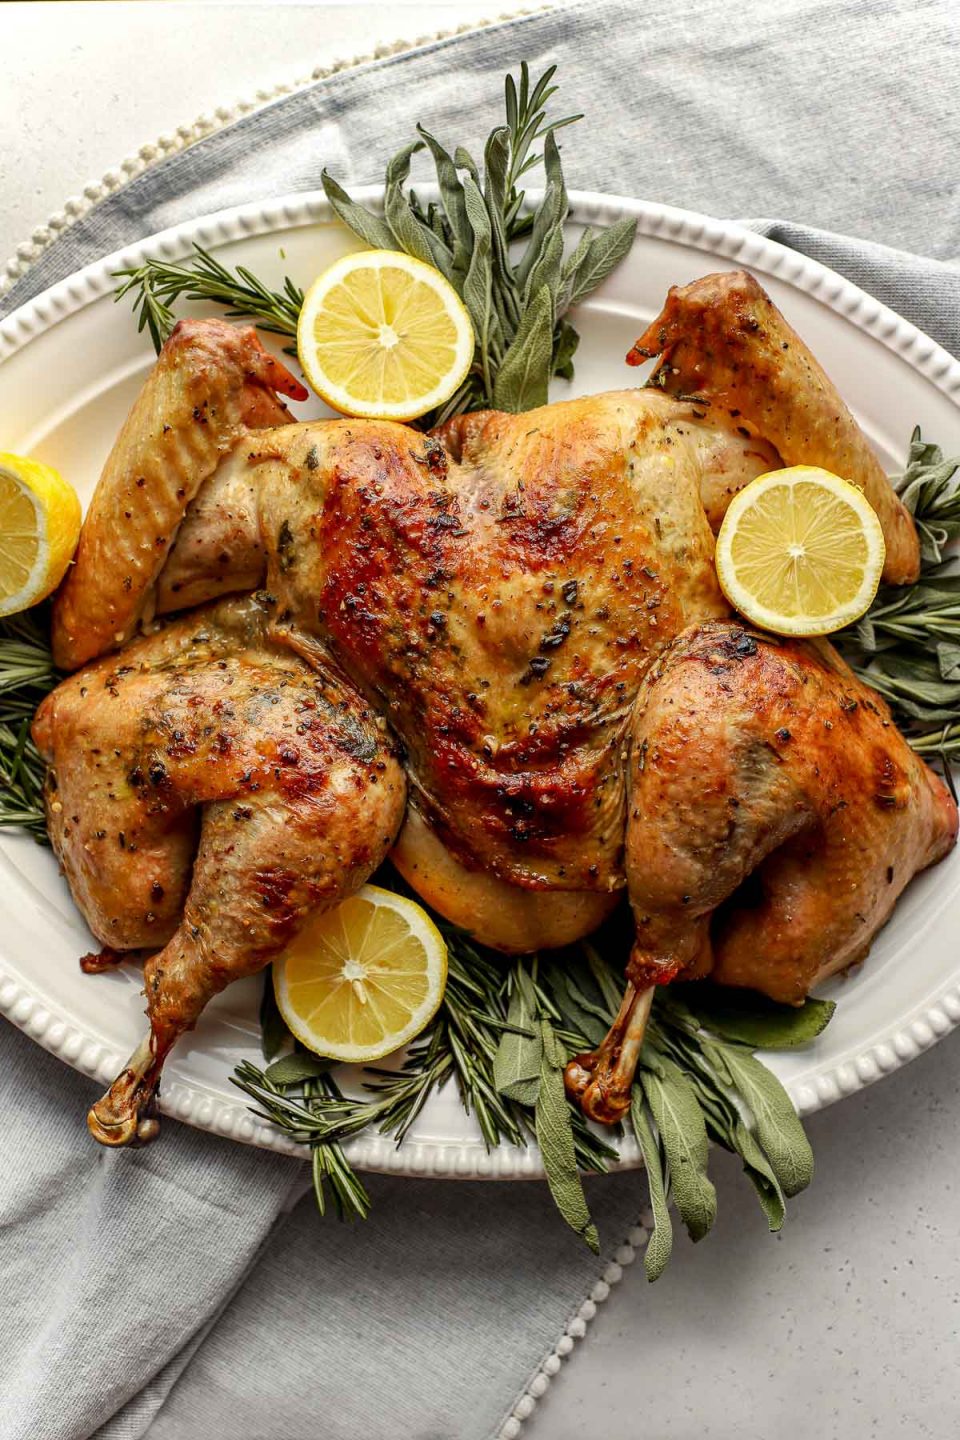 An overhead shot of a roasted spatchcocked turkey seasoned with lemon herb butter arranged on a white serving platter. The platter has been garnished with various fresh herbs and lemon slices. A light gray linen napkin is tucked underneath the platter and the platter sits atop ​a lightly colored textured surface.